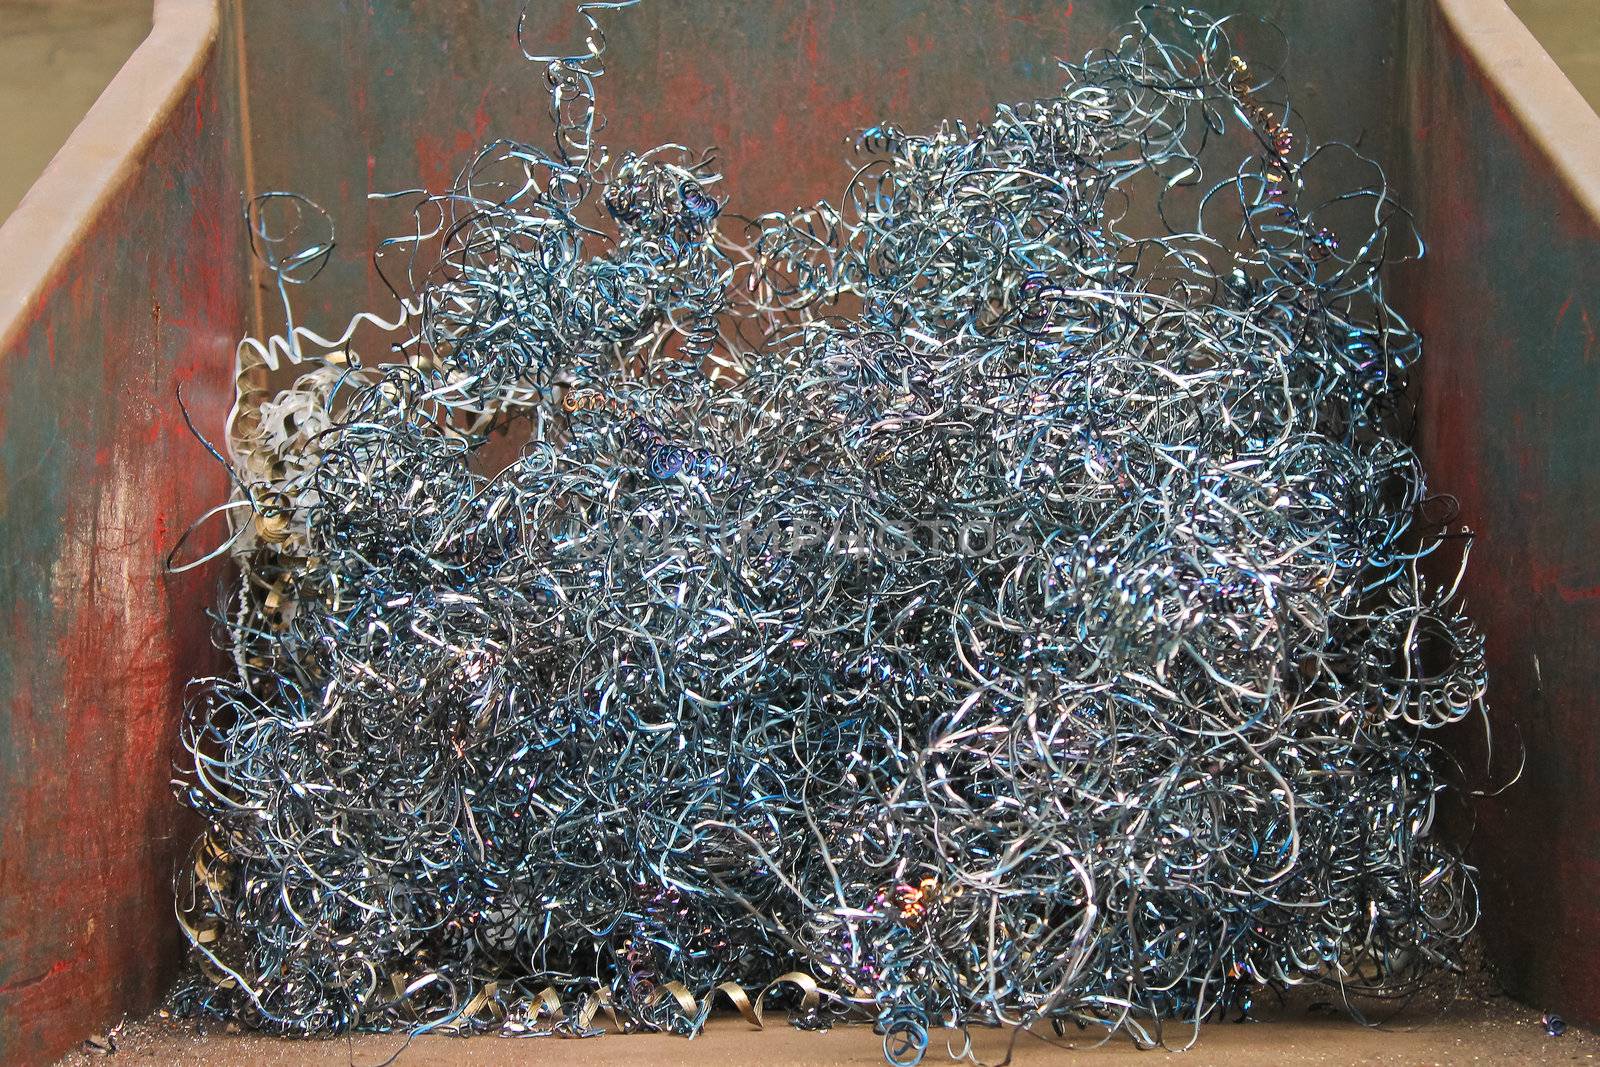 Metal shavings in a container by NickNick